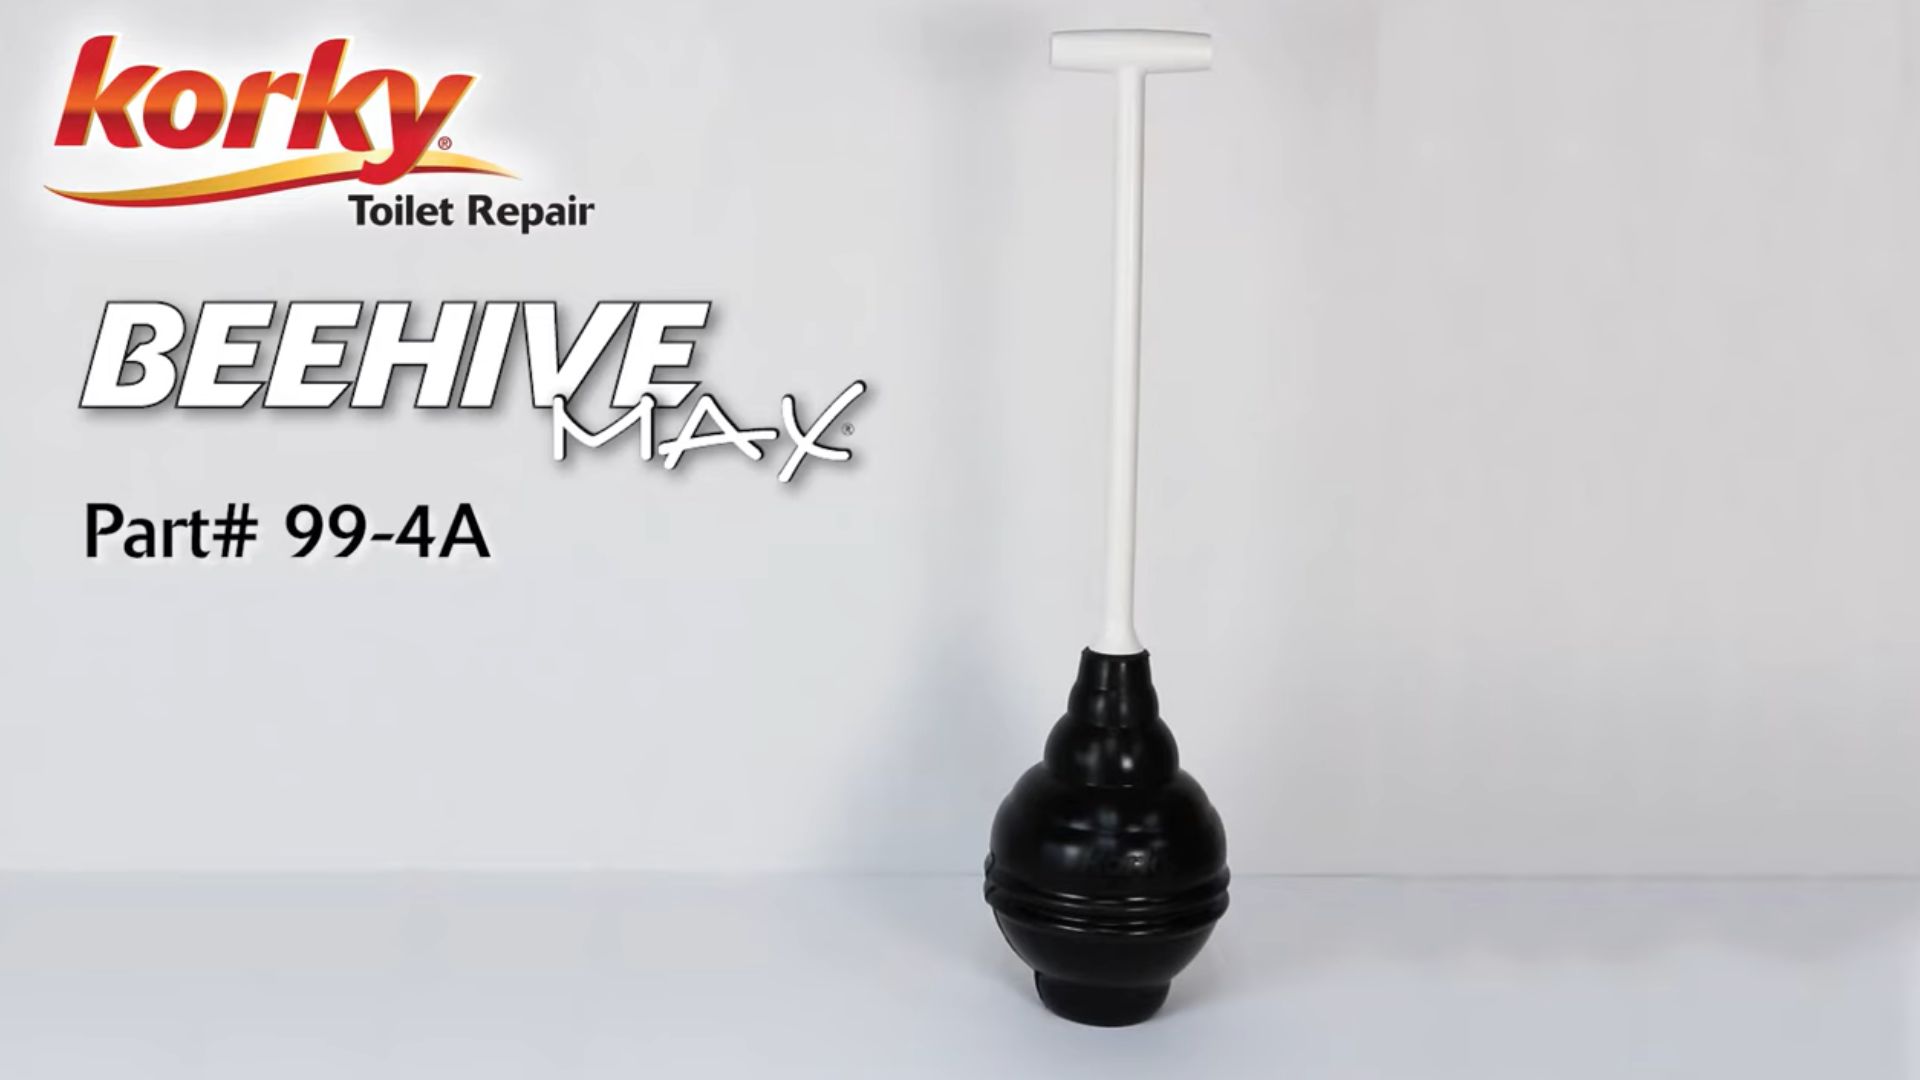 The Powerful Beehive Max Toilet Plunger | Korky Toilet Repair